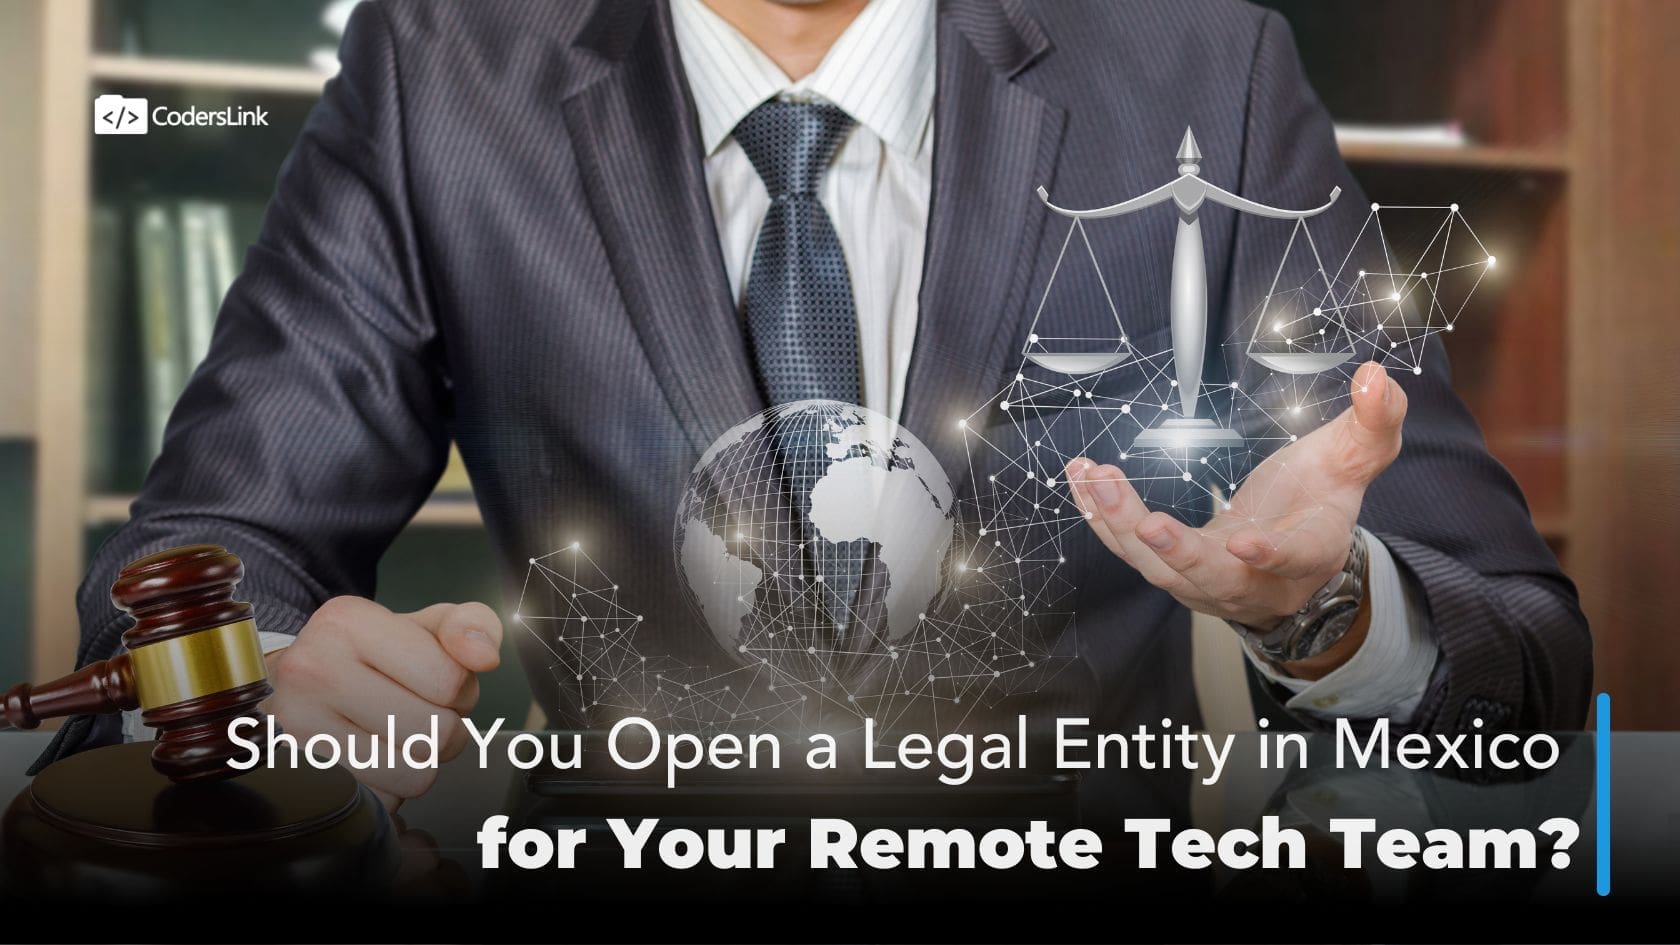 Should You Open a Legal Entity in Mexico for Your Remote Tech Team?